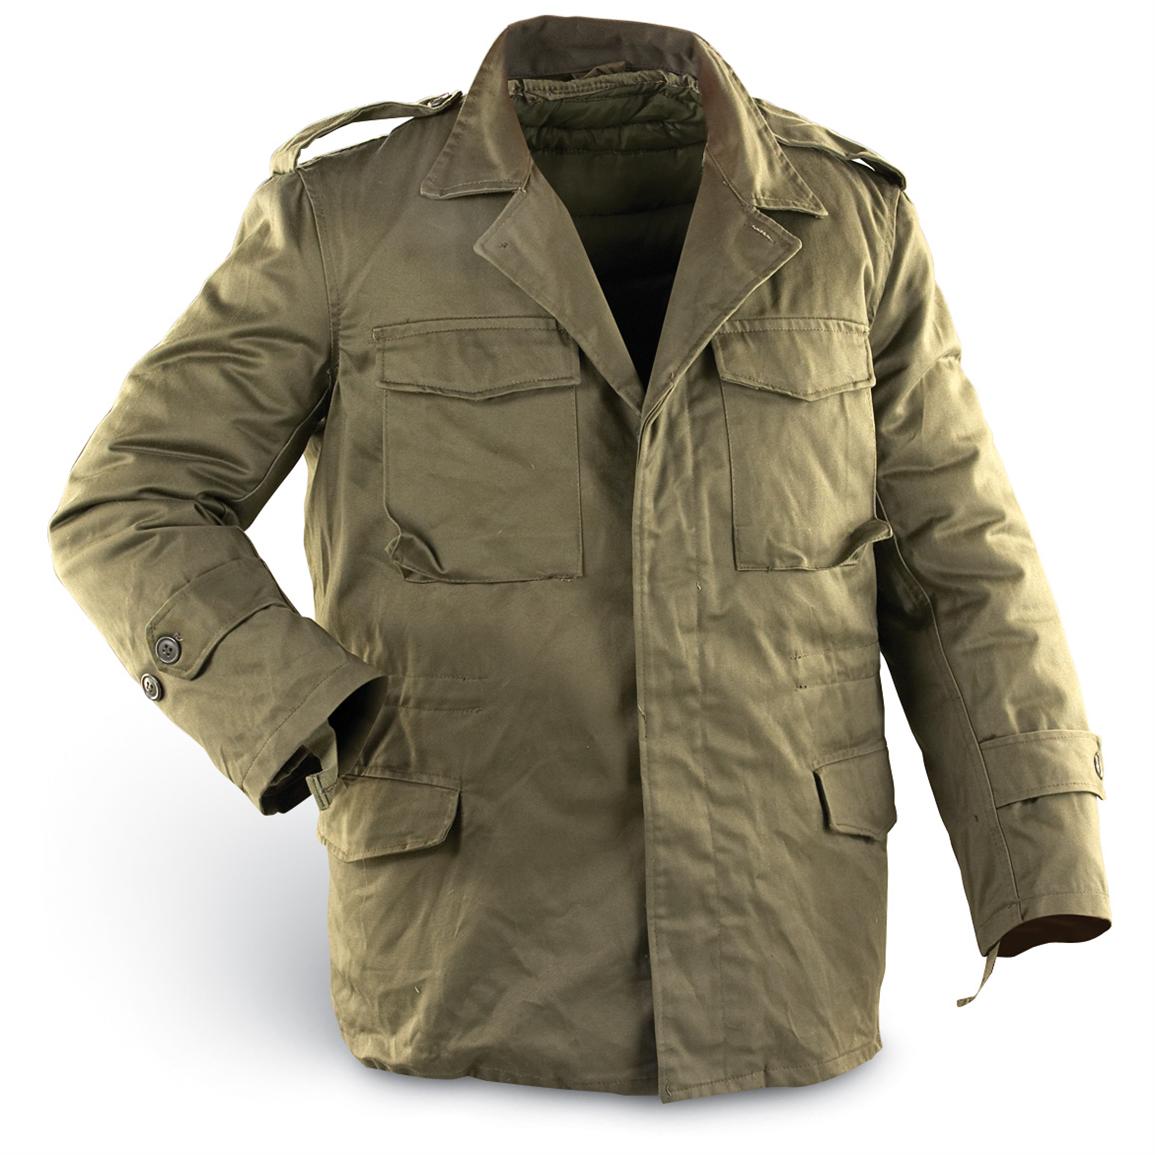 New Greek M65 Jacket with Liner, Olive Drab - 124412, Uninsulated ...